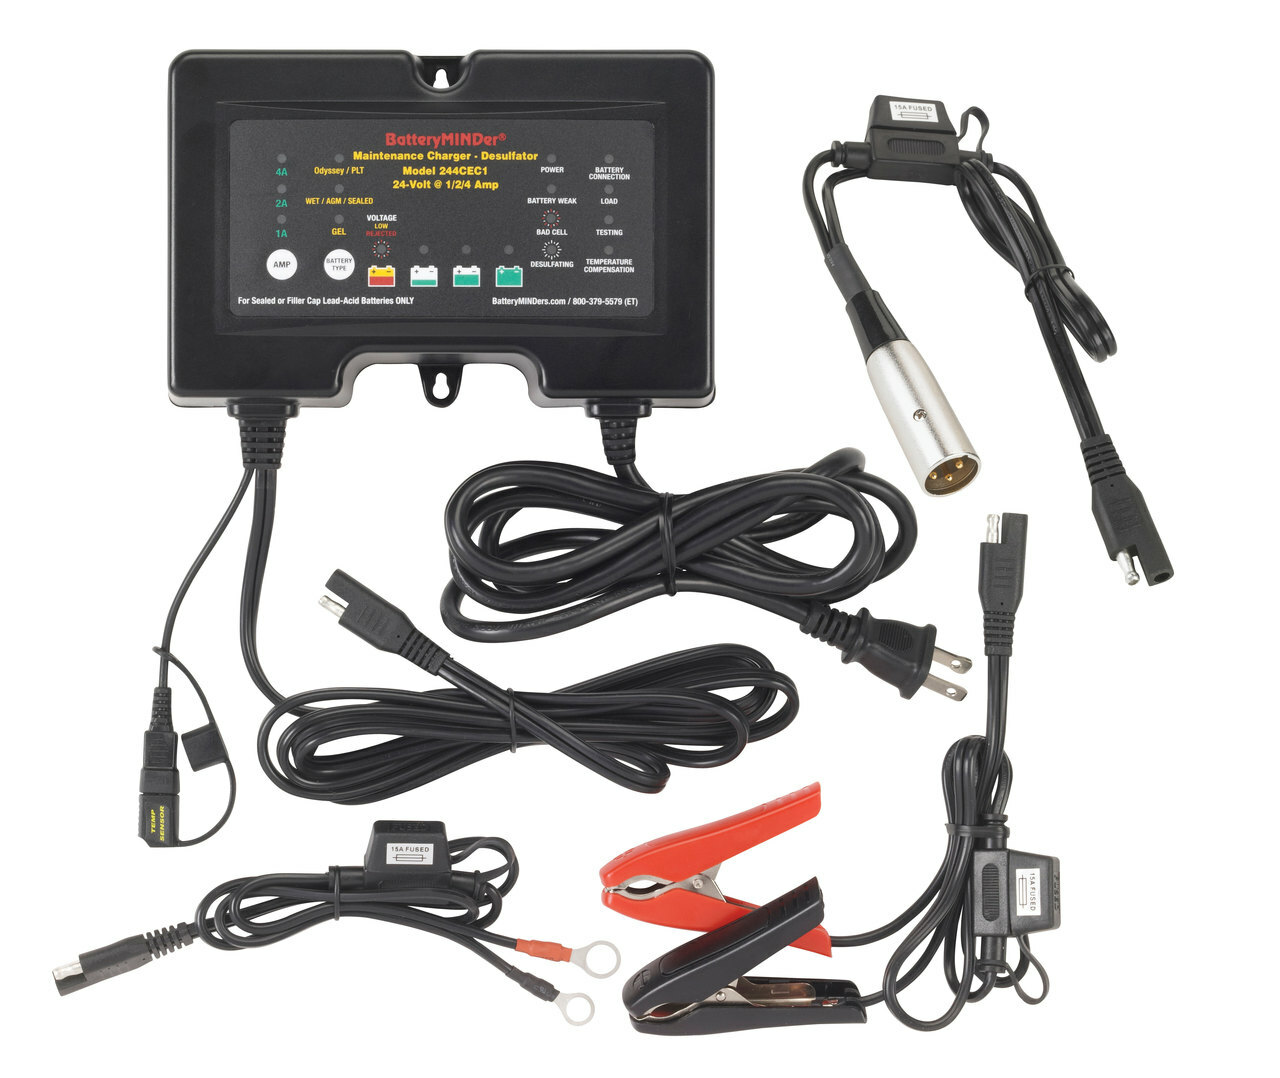 BatteryMINDer Model 244CEC1-XLR1: 24Volt 4 Amp (24V 1/2/4 AMP)  Charger/Maintainer/Desulfator for Power Chairs & Mobility Scooters